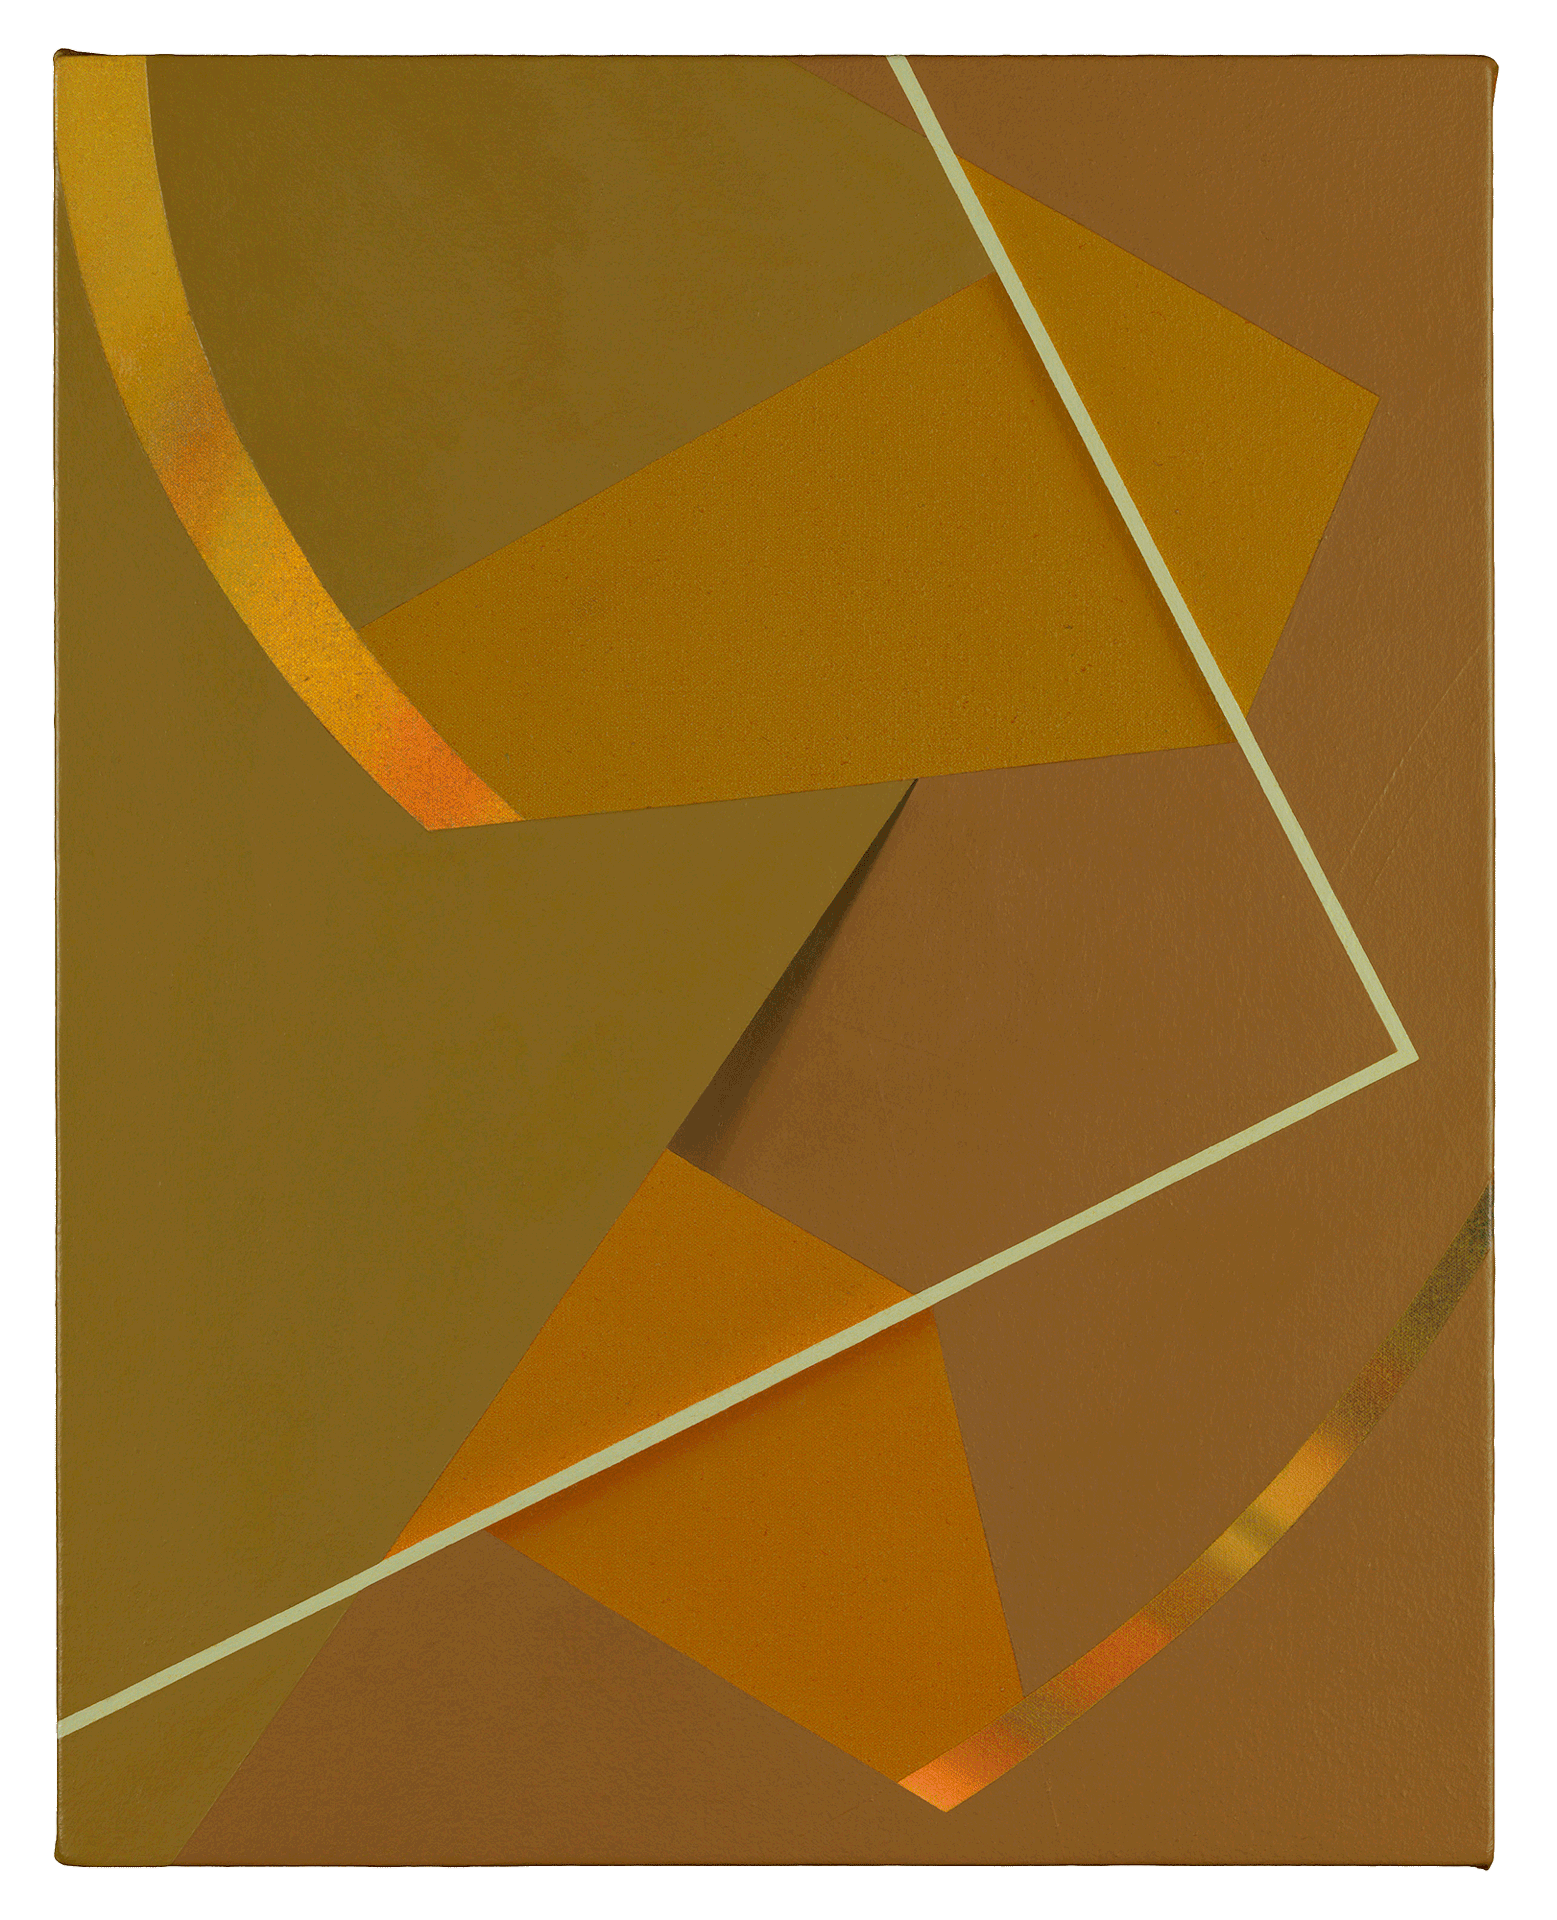 A painting by Tomma Abts, titled Jeles, dated 2008.